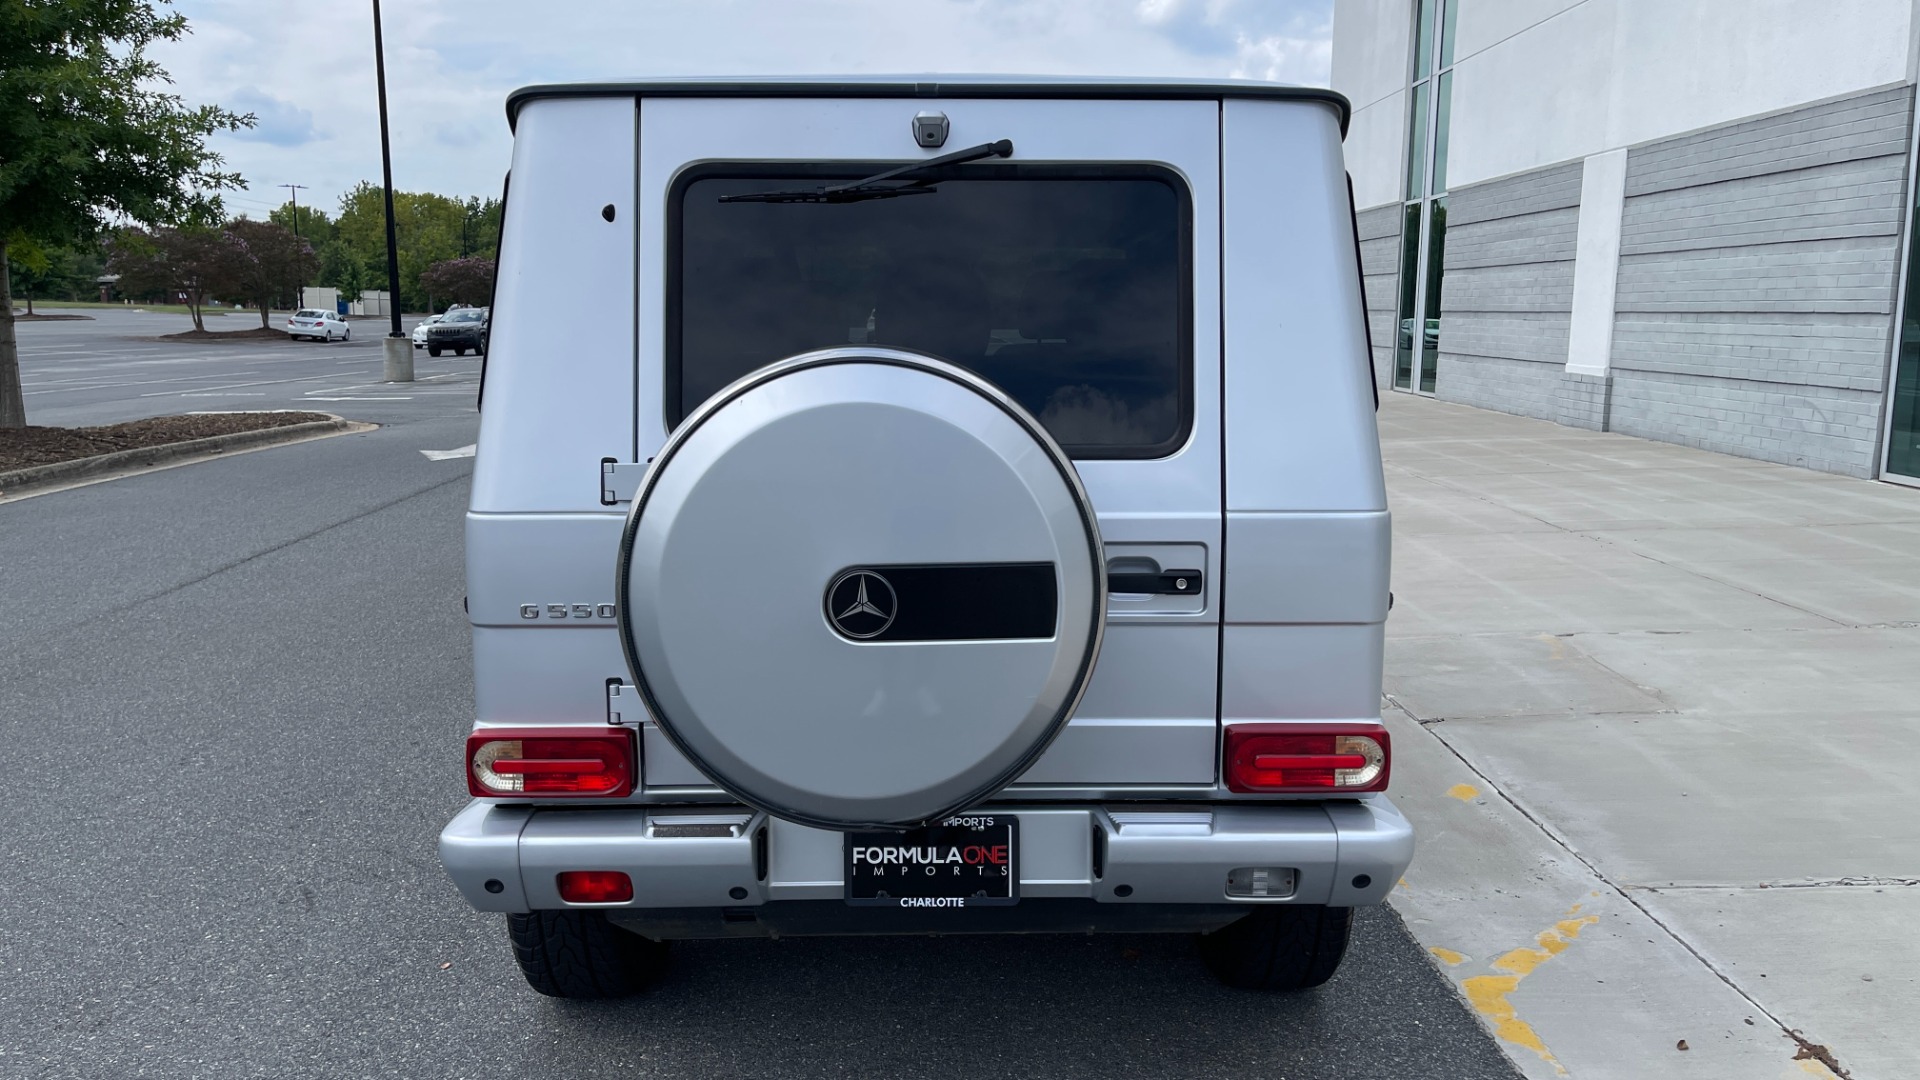 Used 2009 Mercedes-Benz G-Class 5.5L / G550 / NAV / REARVIEW / COOLED SEATS / HEATED SEATS / SUNROOF for sale $52,995 at Formula Imports in Charlotte NC 28227 7